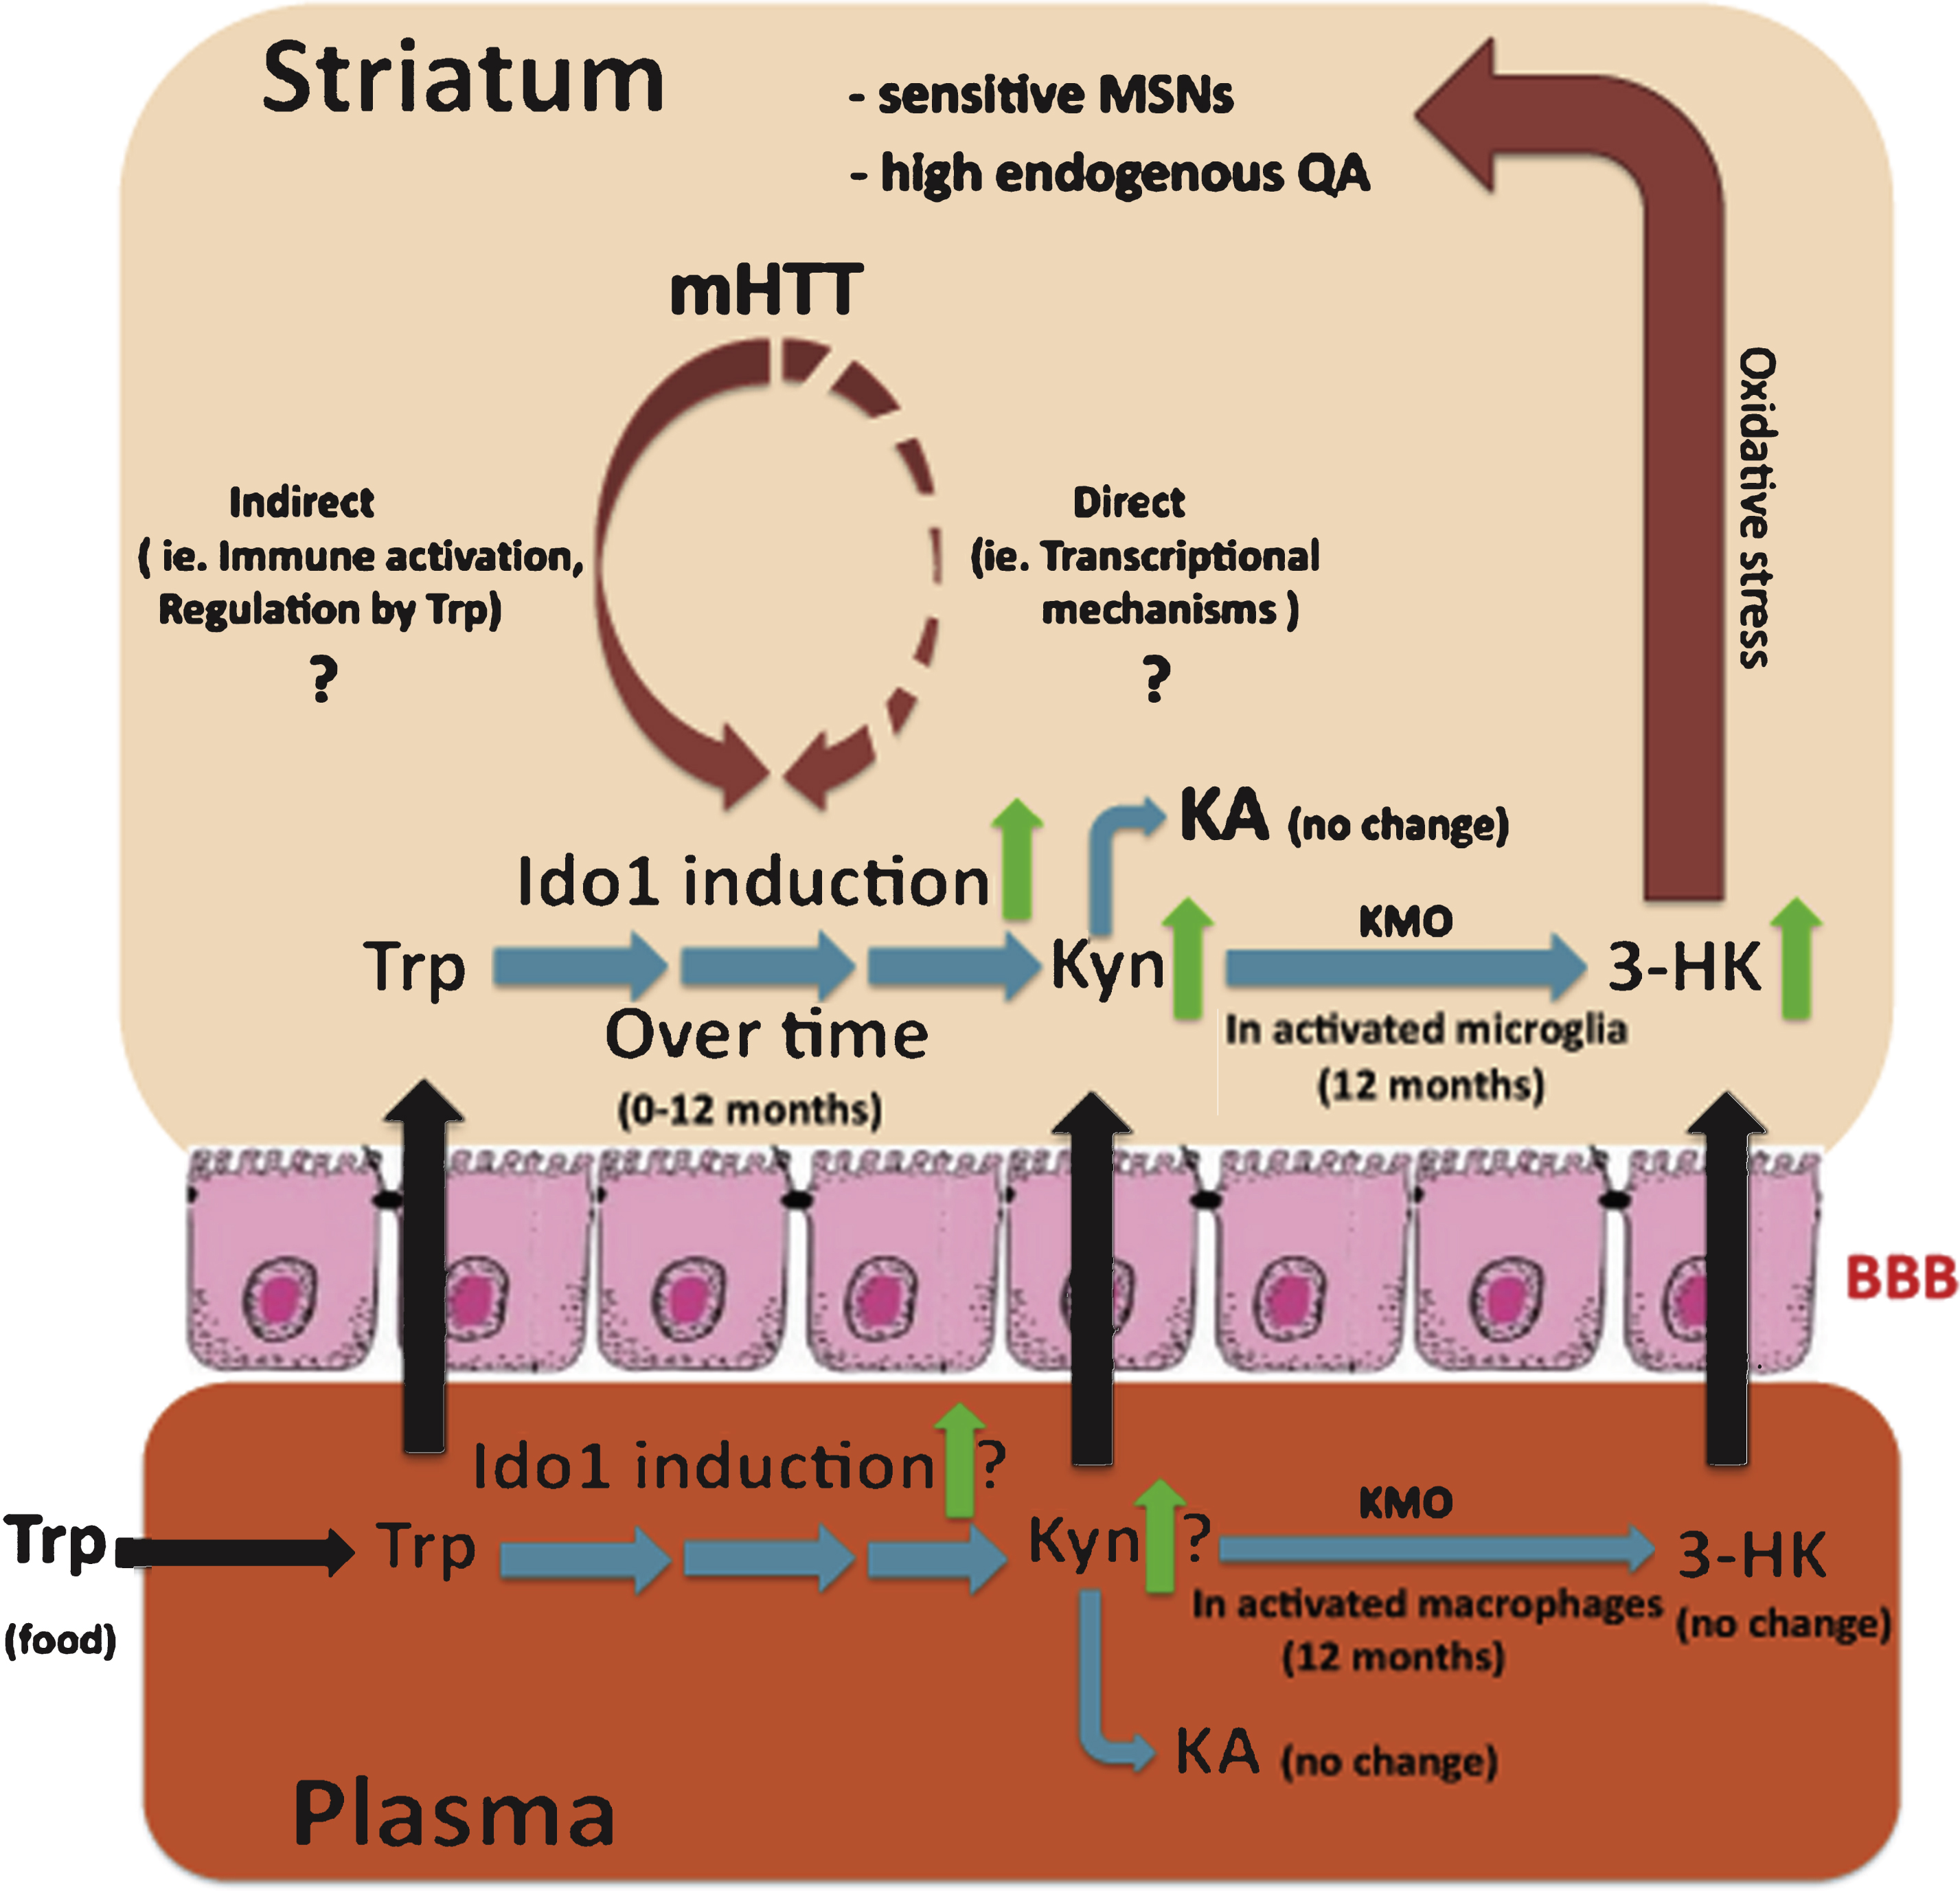 A model describing potential mechanism(s) involved in the selective vulnerability of the striatum in HD based on the YAC128 model. We propose that induction of Ido1 expression and activity in the striatum by mutant huntingtin (mHTT) and inflammation plays a central role in the observed imbalance of downstream kynurenine pathway metabolites. This imbalance, and altered transport of kynurenine pathway metabolites through the blood brain barrier (BBB) from blood to CNS, may result in increased sensitivity of striatal neurons to glutamate toxicity in HD. Dates (months) provided in the figure refer to findings at those ages of YAC128 mice, with 12 months representing an advanced stage with significant striatal cell loss.